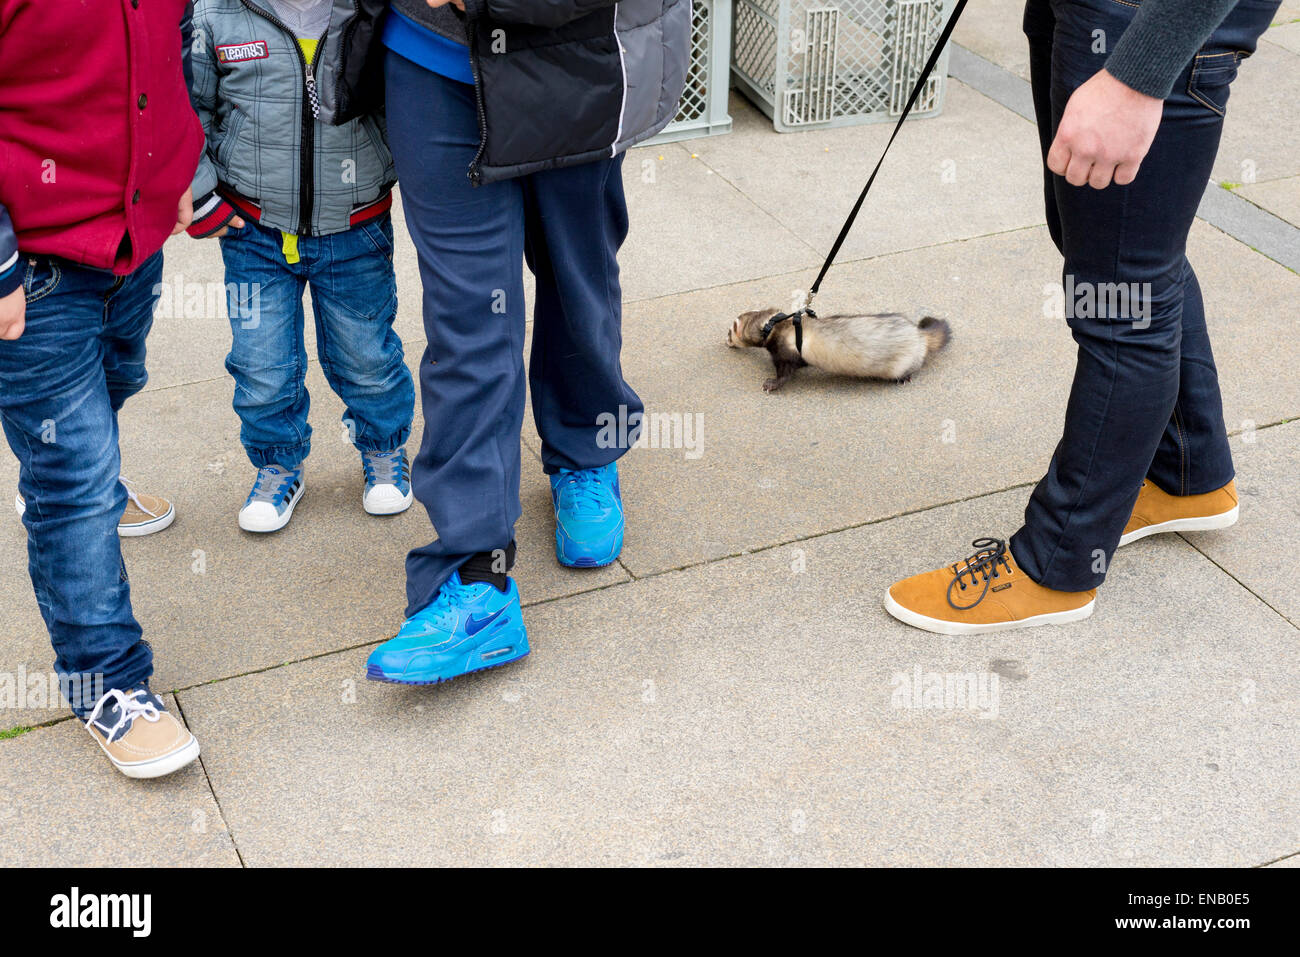 Adult and children walking A ferret (Mustela putorius furo) on a lead at a pavement Stock Photo